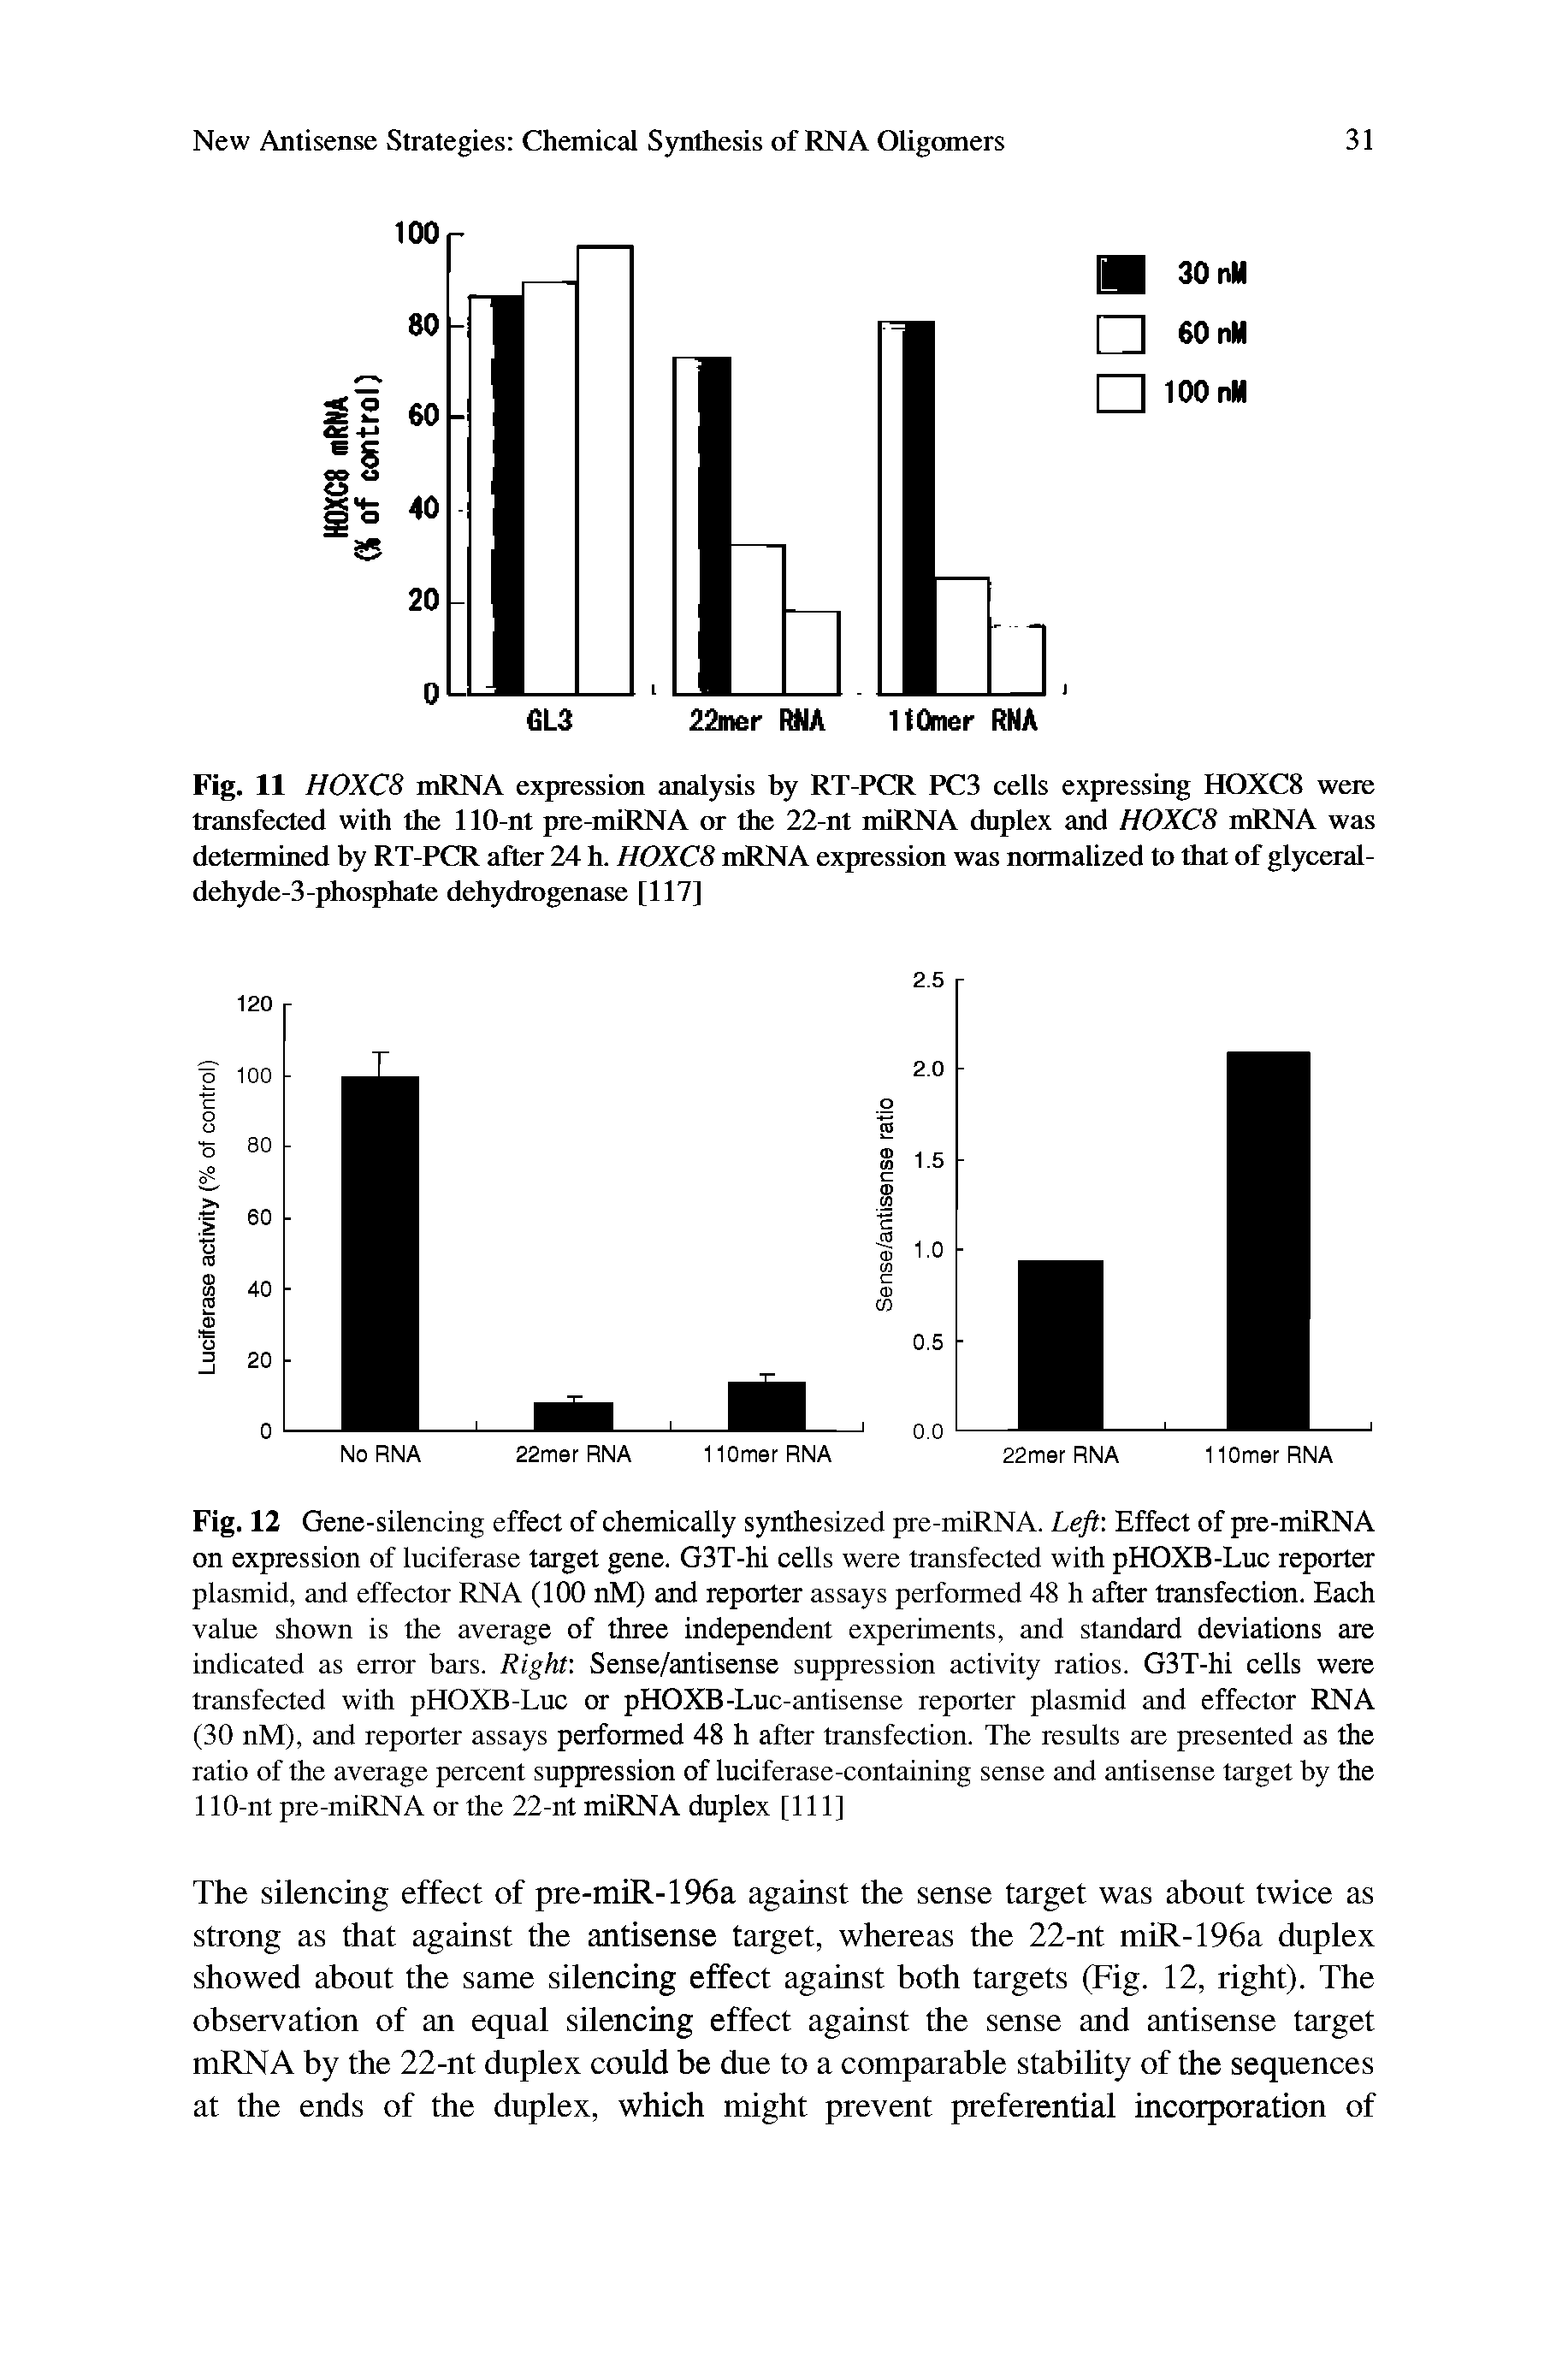 Fig. 12 Gene-silencing effect of chemically synthesized pre-nuRNA. Left-. Effect of pre-nuRNA on expression of luciferase target gene. G3T-hi cells were transfected with pHOXB-Luc reporter plasmid, and effector RNA (100 nM) and reporter assays performed 48 h after transfection. Each value shown is the average of three independent experiments, and standard deviations are indicated as error bars. Right. Sense/antisense suppression activity ratios. G3T-hi cells were transfected with pHOXB-Luc or pHOXB-Luc-antisense reporter plasmid and effector RNA (30 nM), and reporter assays performed 48 h after transfection. The results are presented as the ratio of the average percent suppression of luciferase-containing sense and antisense target by the 110-nt pre-miRNA or the 22-nt miRNA duplex [111]...